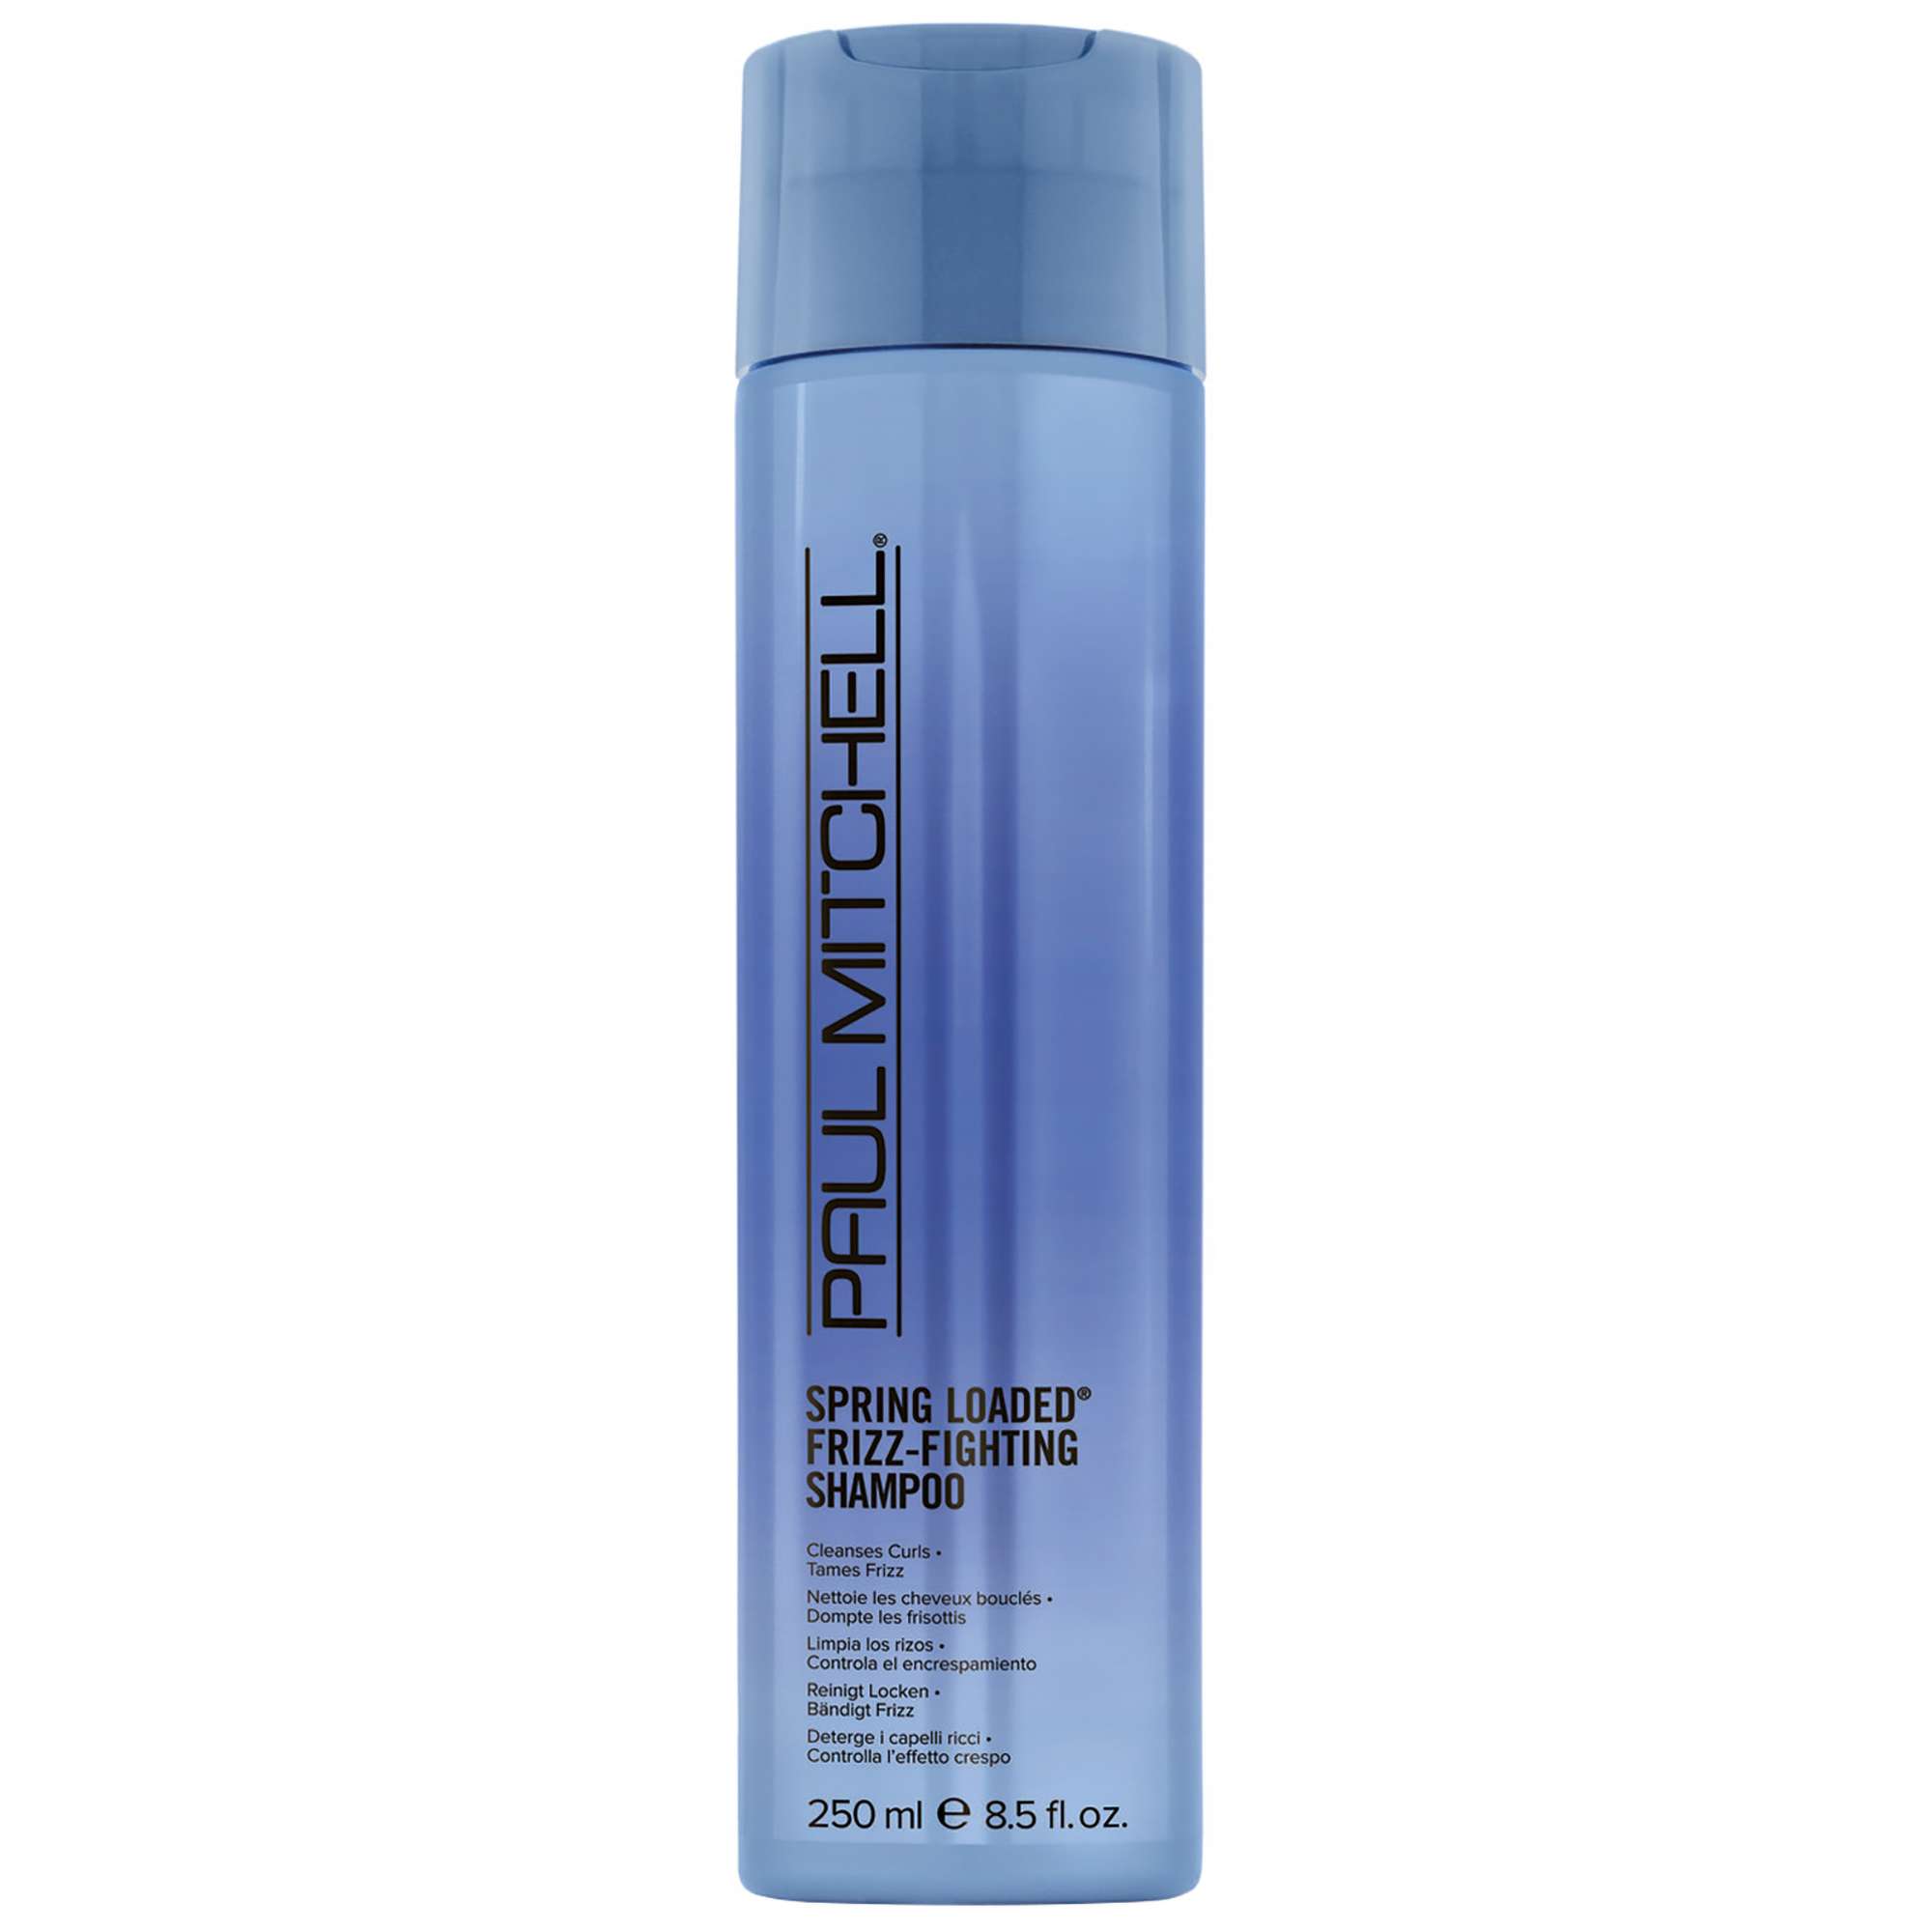 Image of Paul Mitchell Curls Spring Loaded Frizz-Fighting Shampoo 250ml